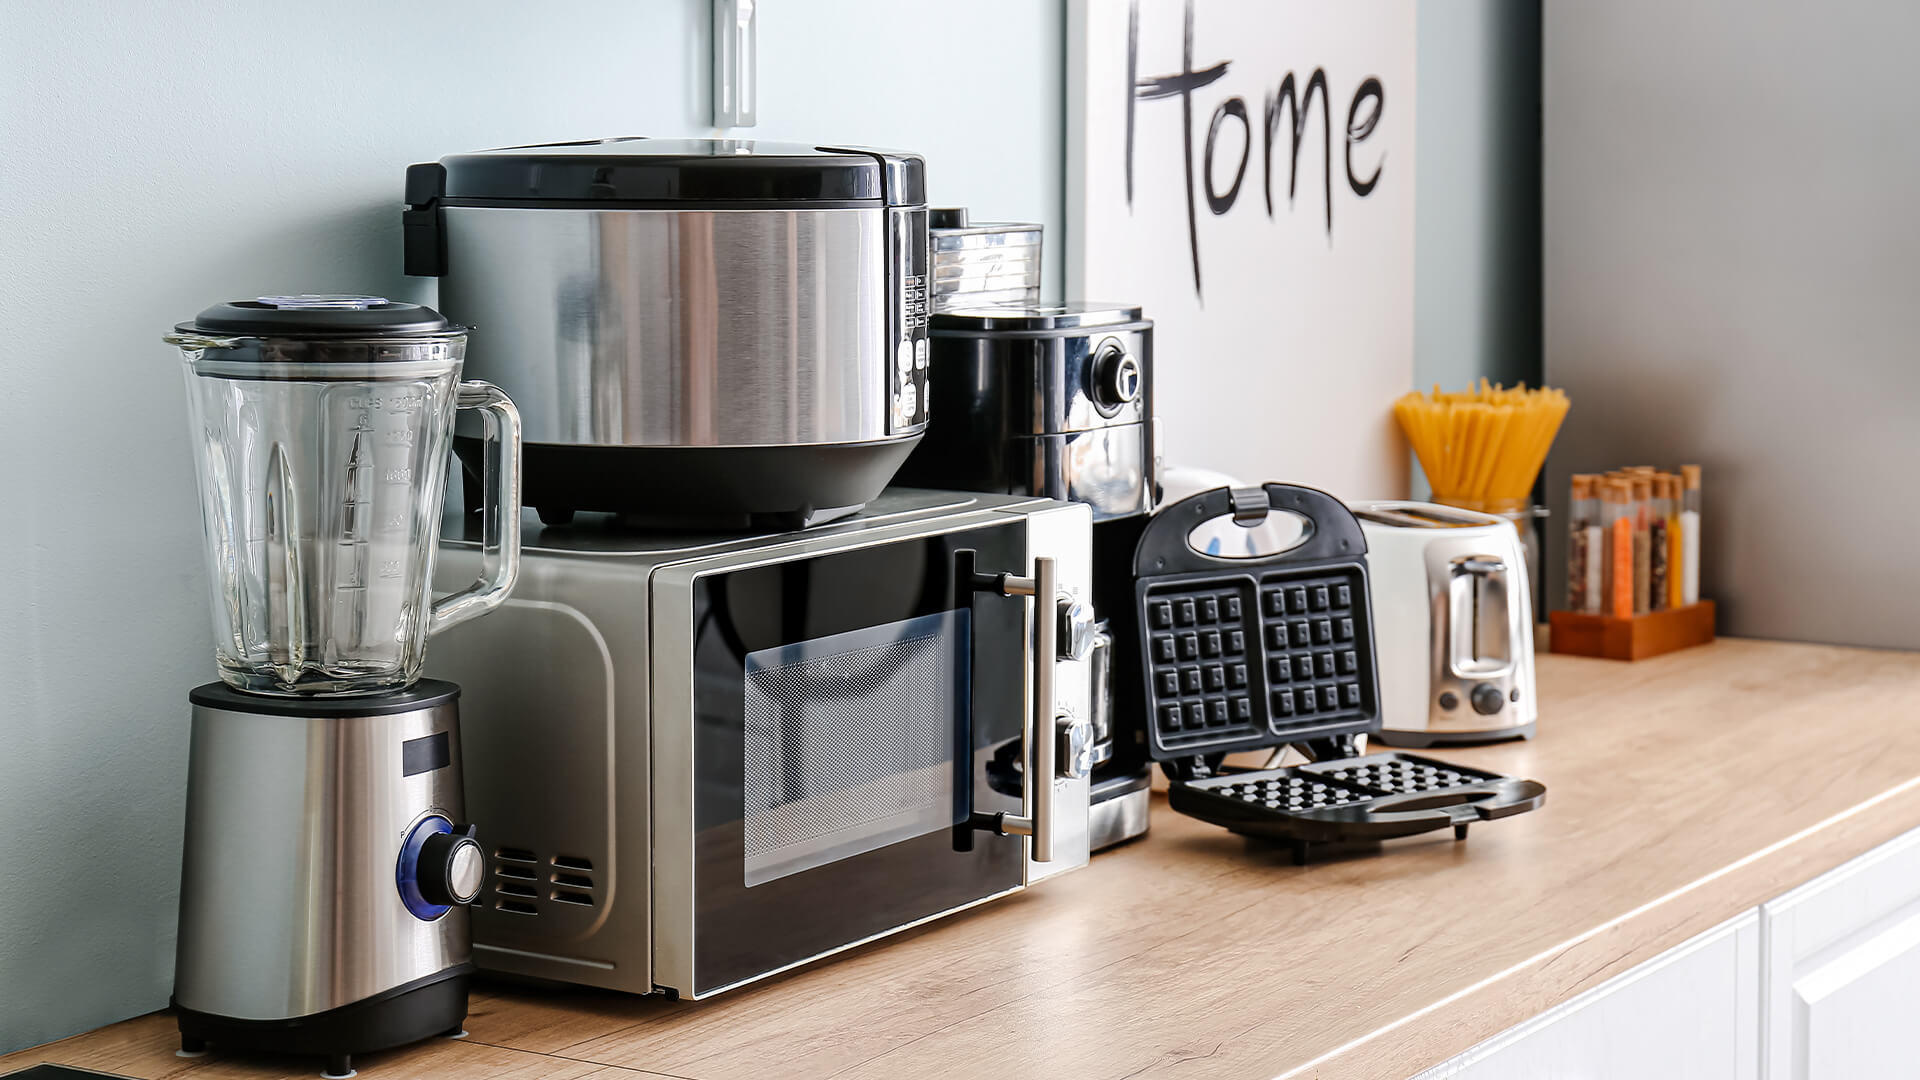 HOME APPLIANCES THAT WILL MAKE 2022 EASIER